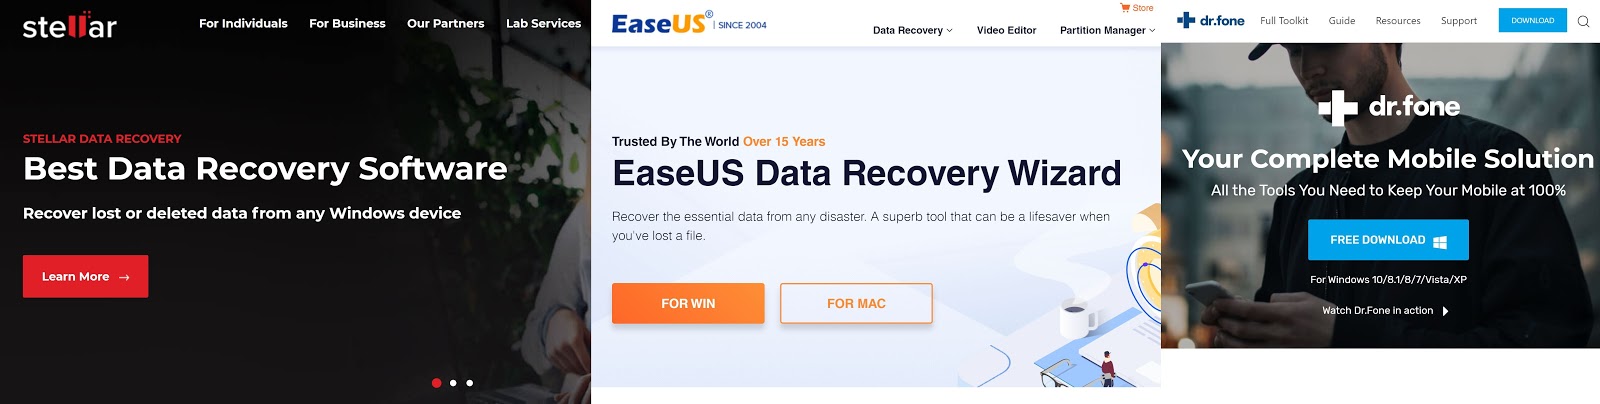 best data recovery tool for mac text messages